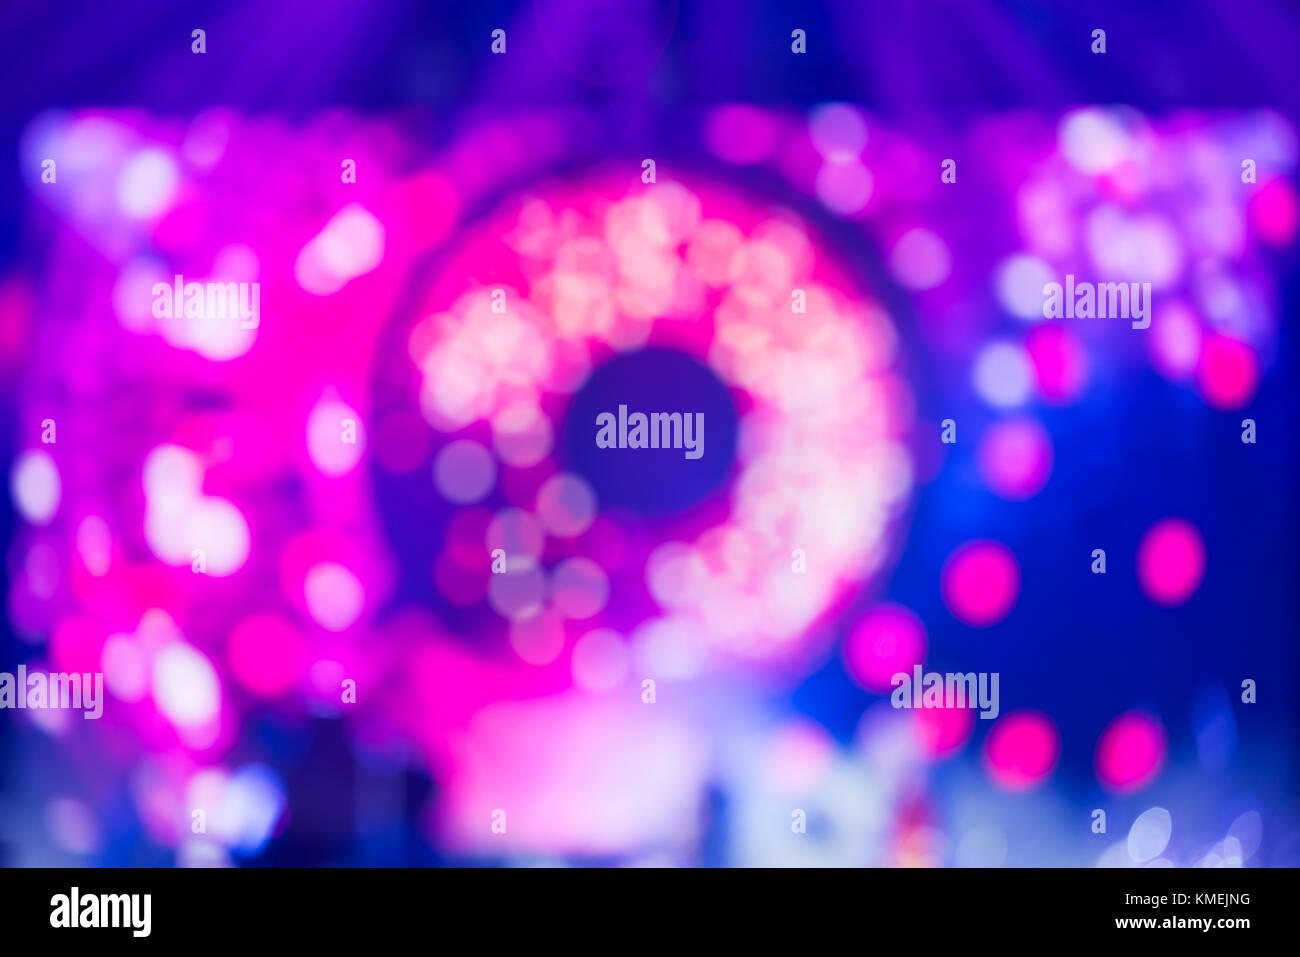 Music live show blue and purple lights  blurred background Stock Photo